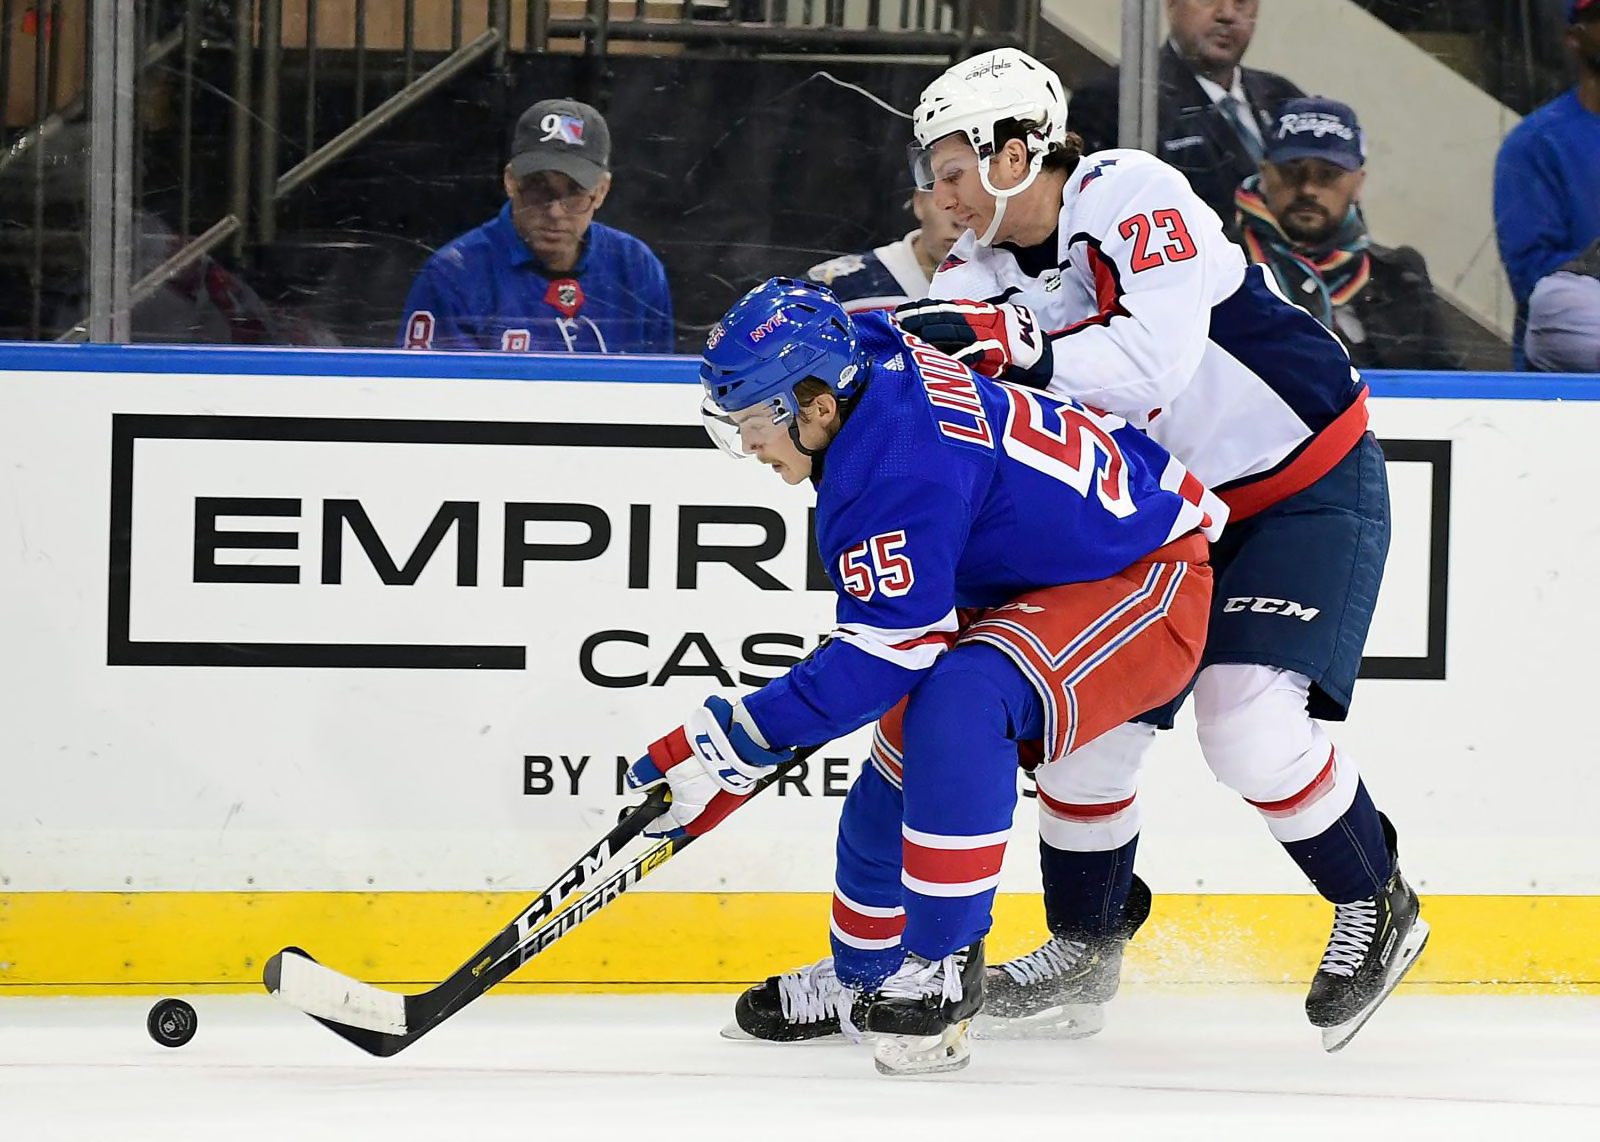 Capitals playoff hopes vanishing after 5-2 loss to Rangers